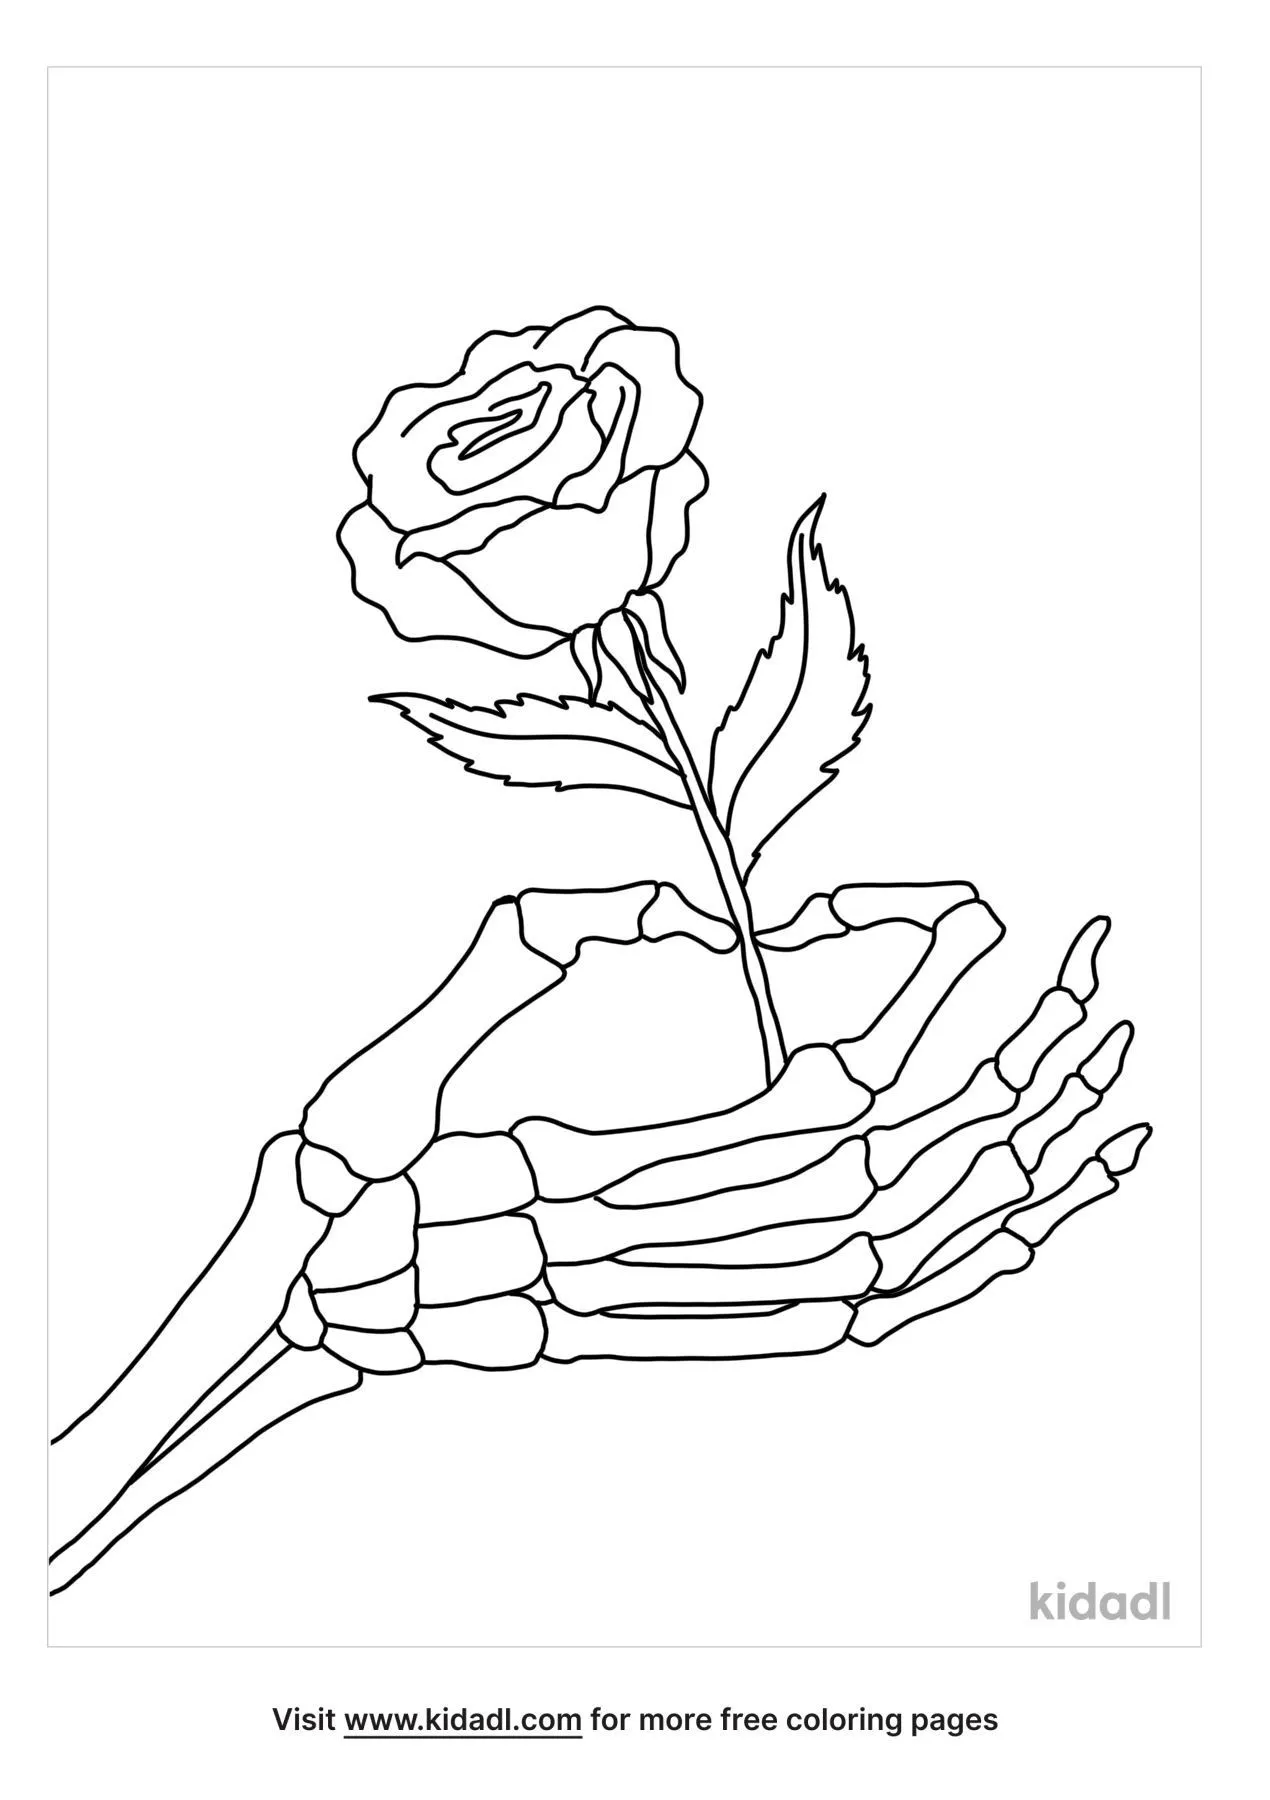 Skeleton Hand Holding Rose Coloring Page